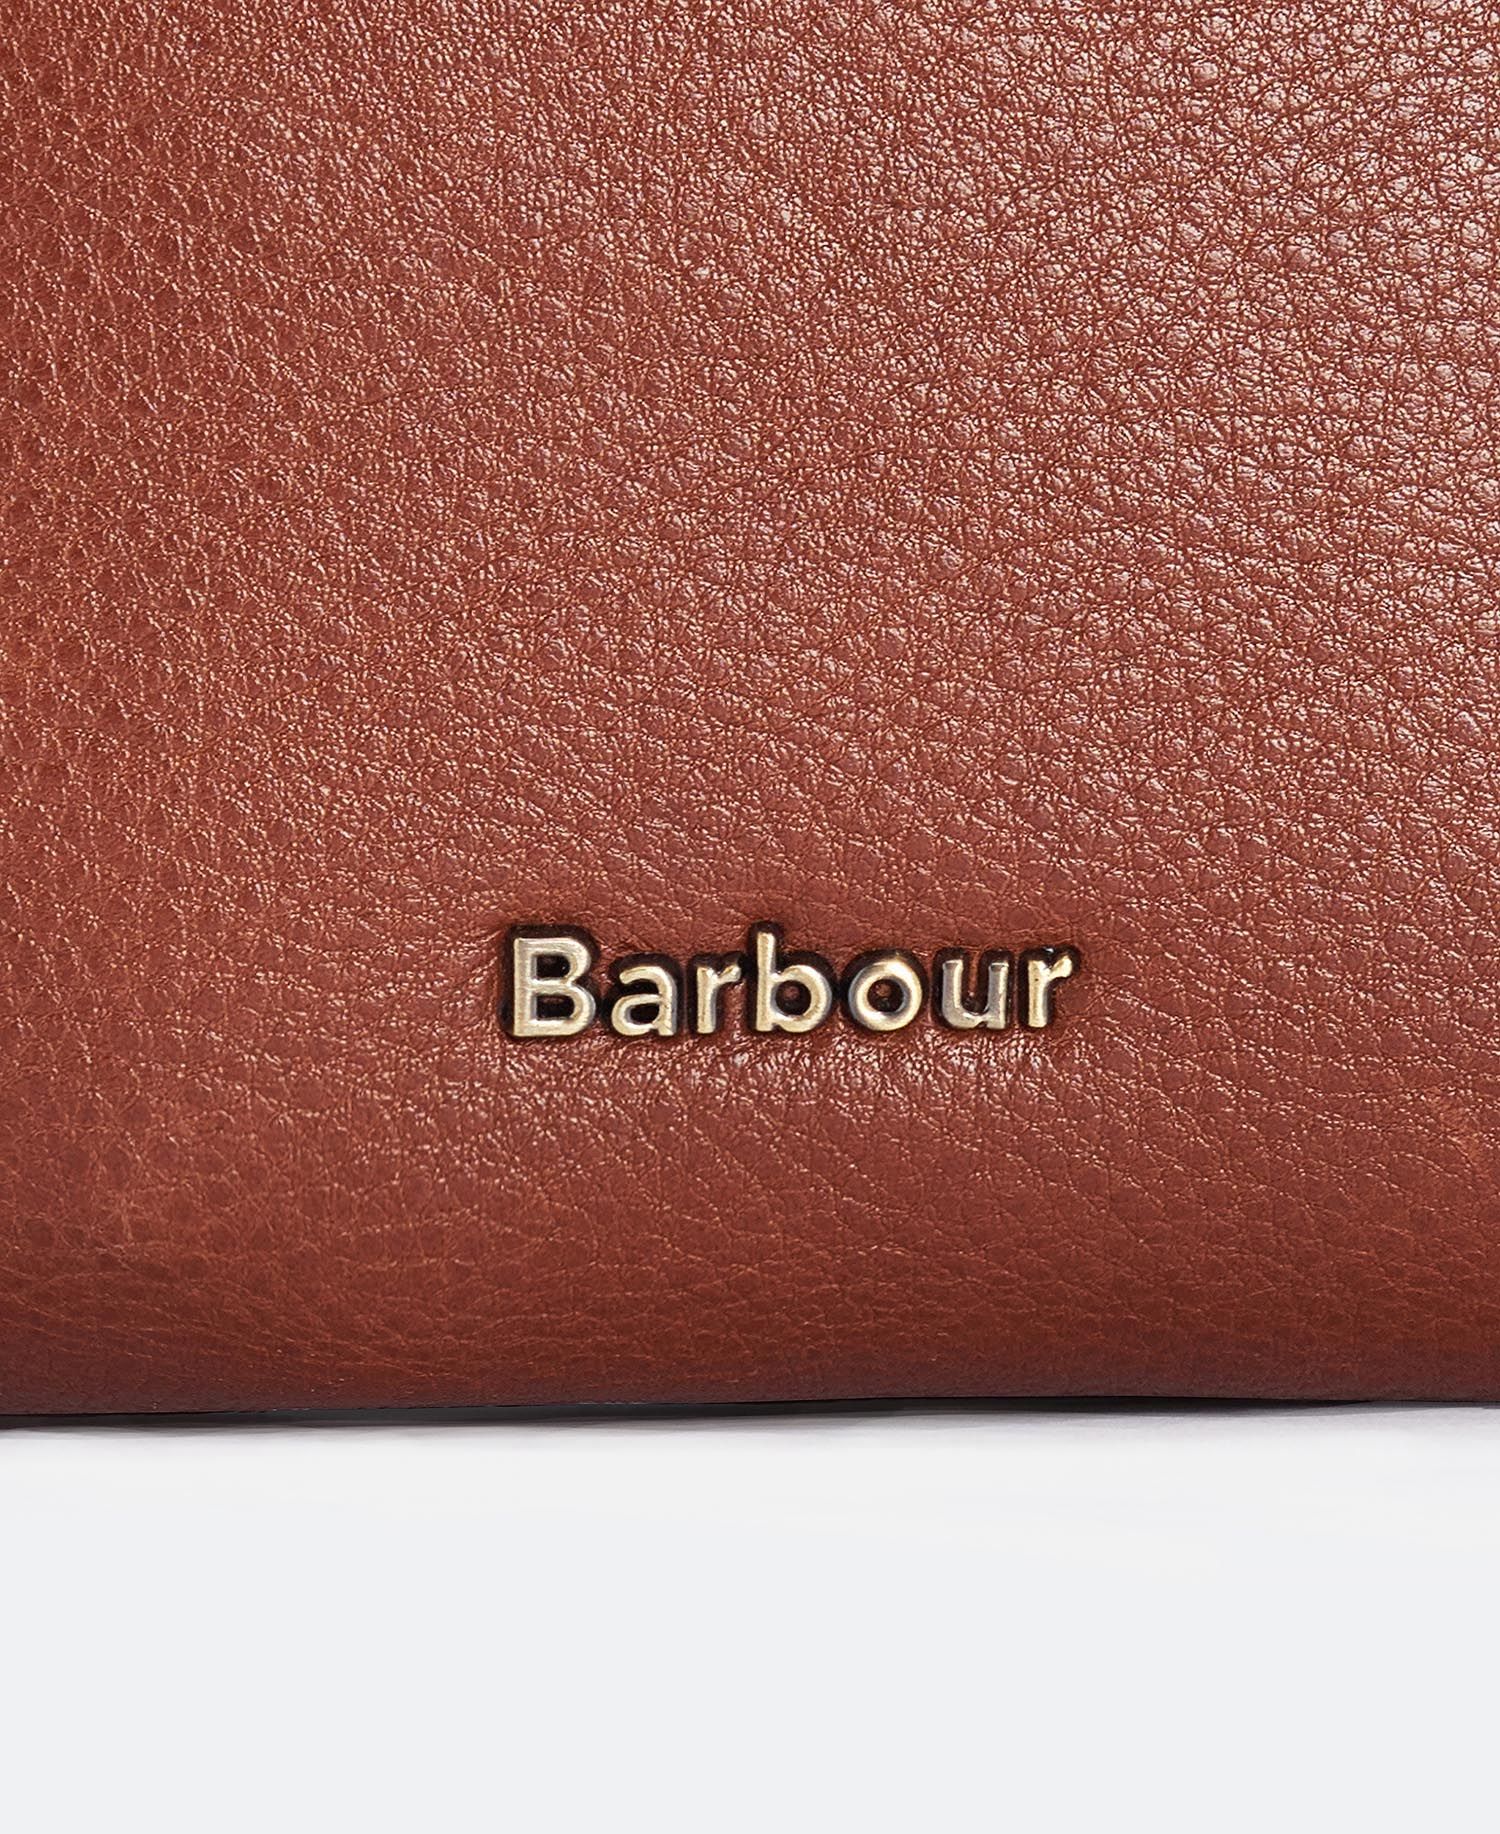 Barbour Laire Travel Purse/Document Holder - Brown